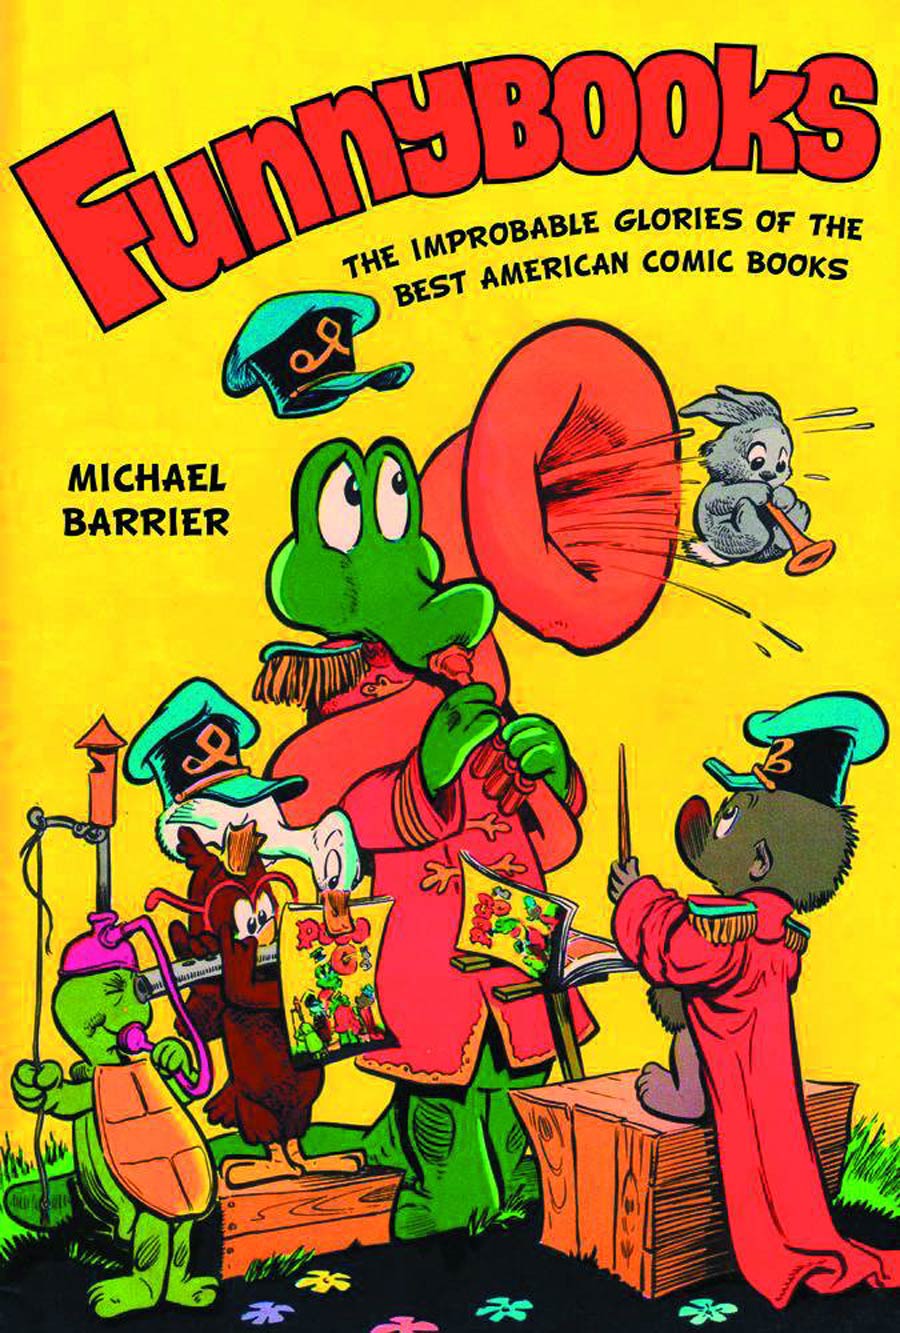 Funnybooks Improbable Glories Of The Best American Comic SC